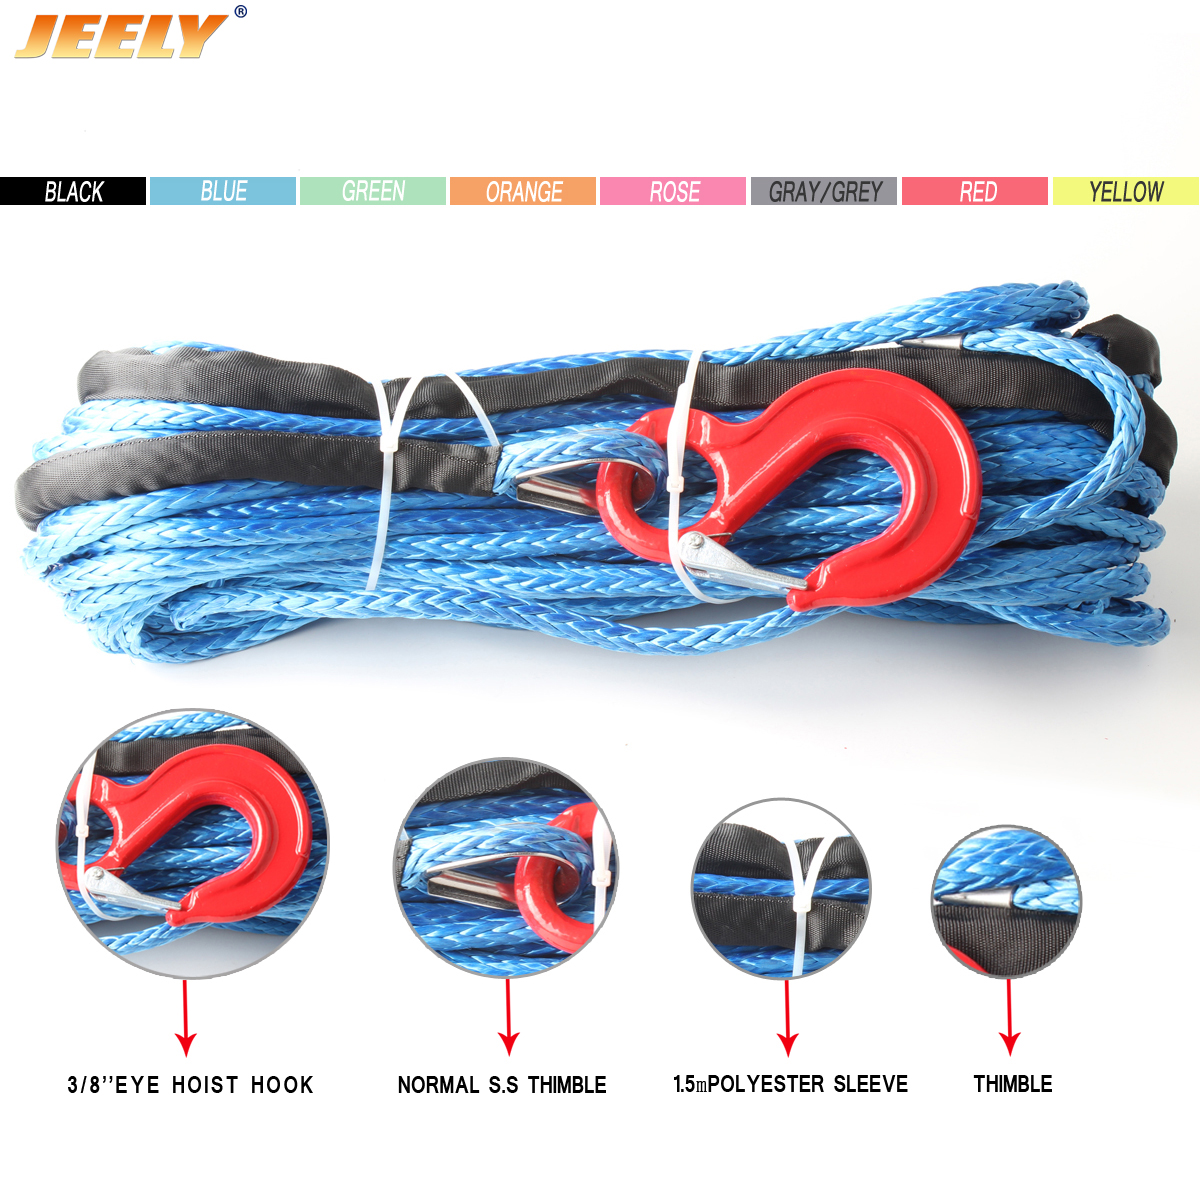 15mm*40m 12 Strand UHMWPE Synthetic 4X4/ATV Braid Winch Rope With Thimble and HOOK for Offroad